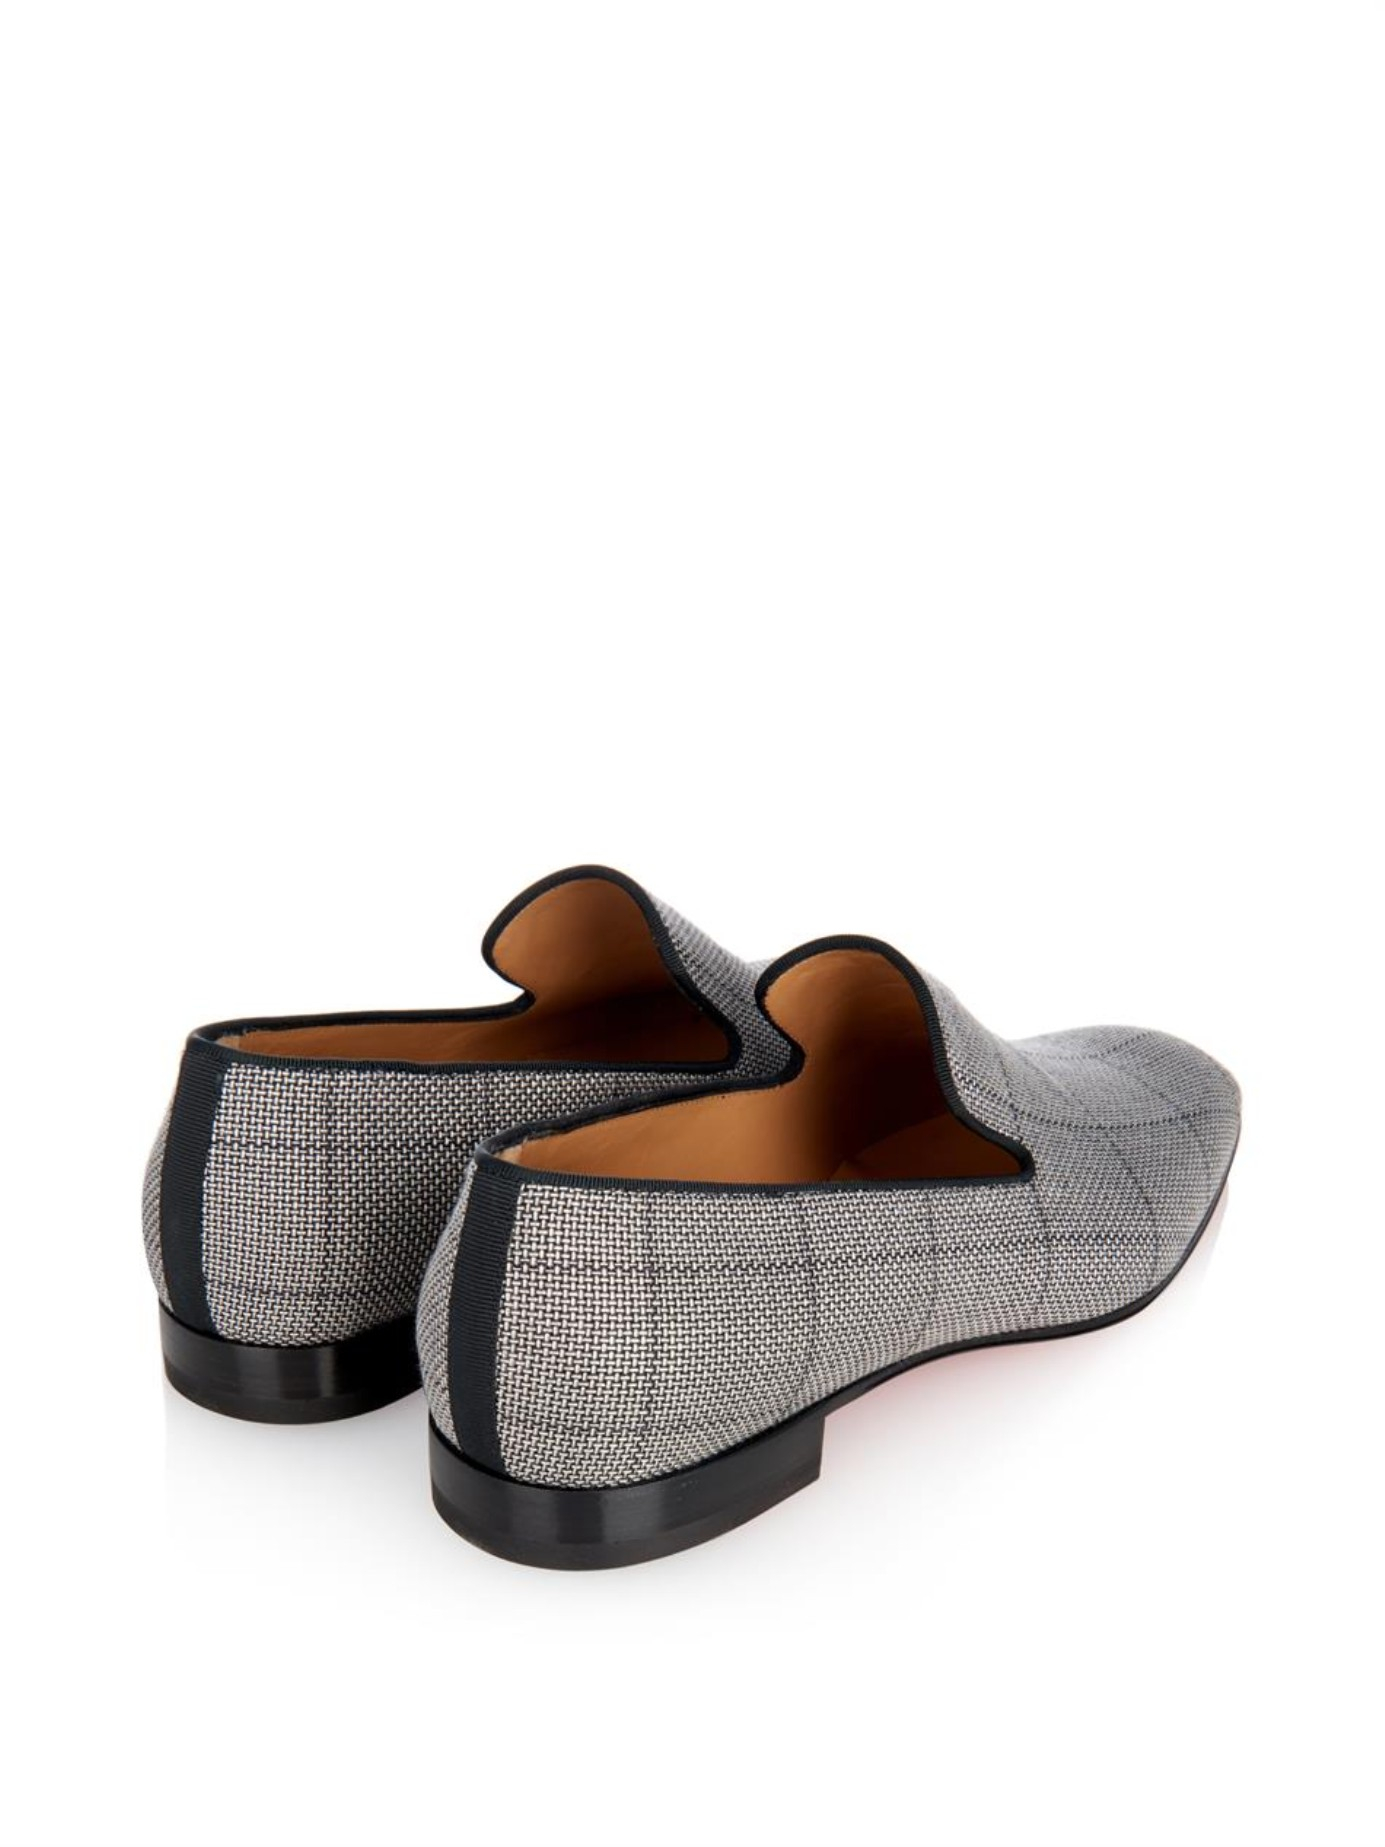 CHRISTIAN LOUBOUTIN Loafers for Men